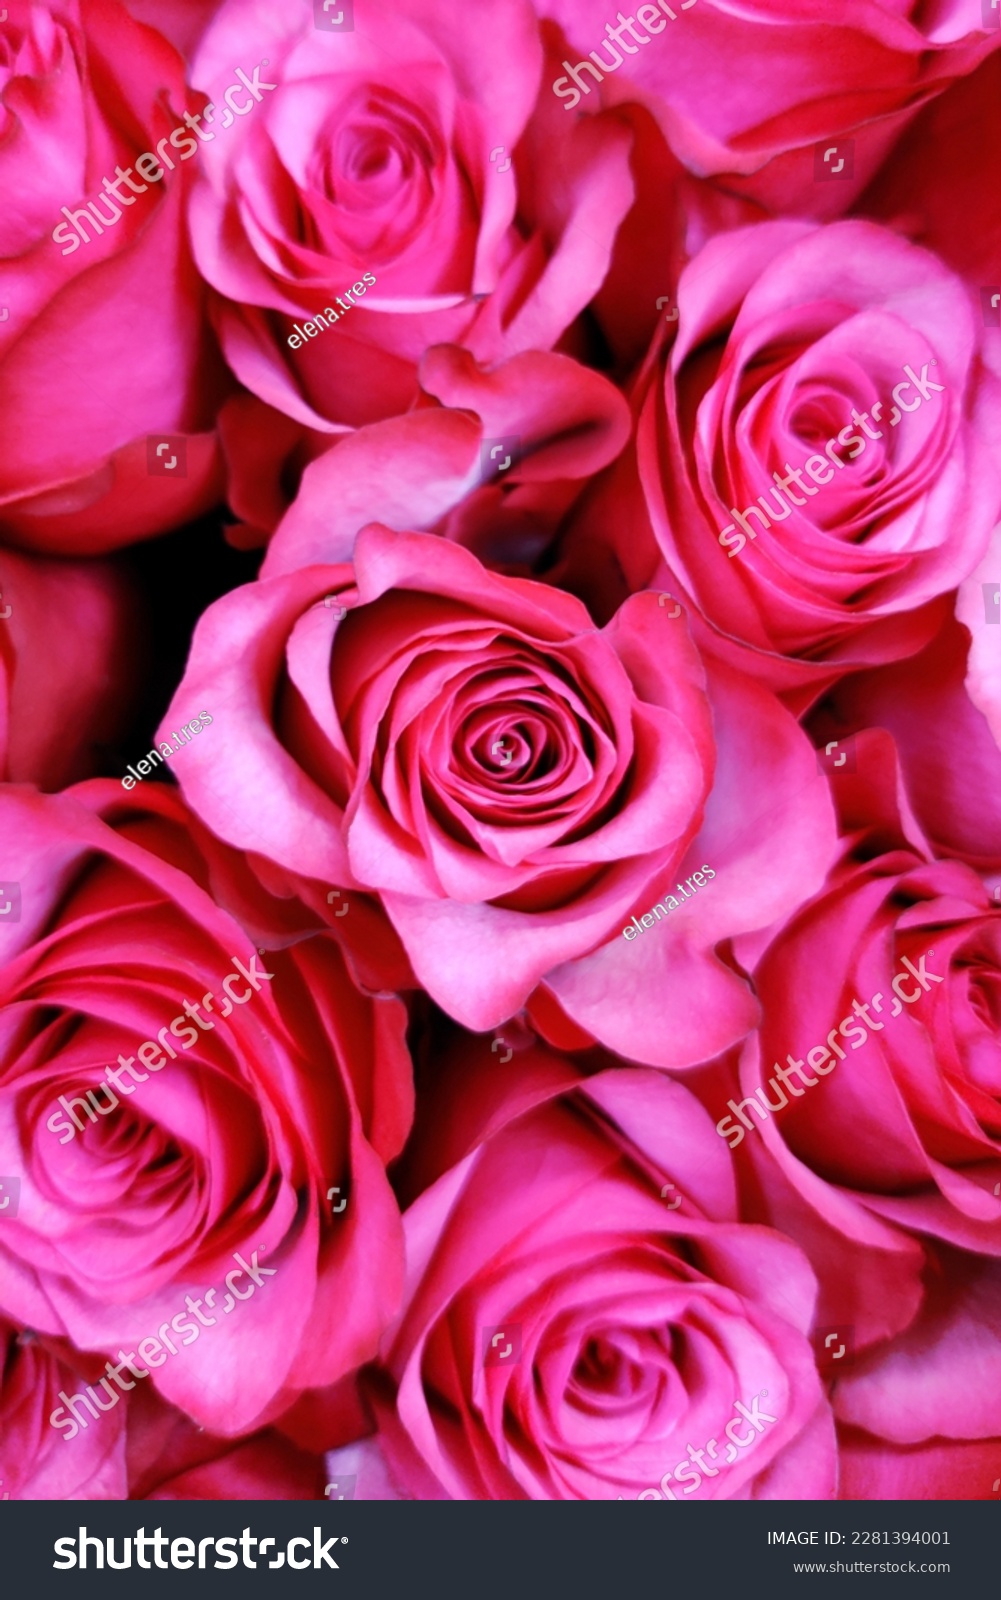 Pink roses natural floral background close up vertical photo. Fresh flowers in bouquet buds top view. Bright colors. Florist shop. Greeting card design template with copy space. #2281394001